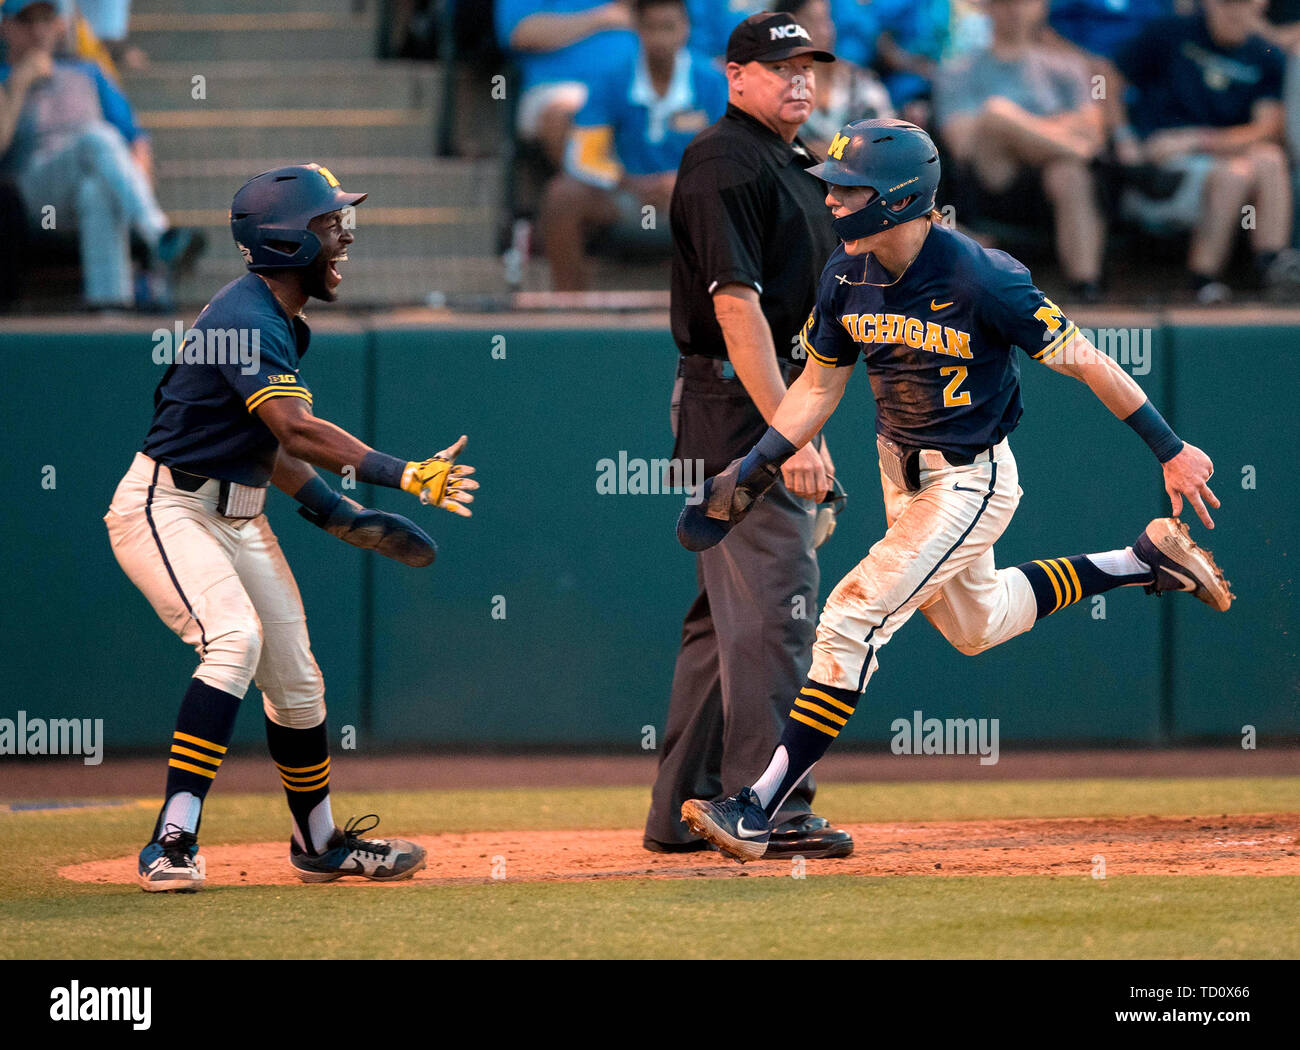 Los Angeles, CA, USA. 09th June, 2019. Michigan infielder (2) Jack Blomgren scores a run after dislocating his finger during an NCAA super regional game between the Michigan Wolverines and the UCLA Bruins at Jackie Robinson Stadium in Los Angeles, California. Michigan defeated UCLA 4-2. (Mandatory Credit: Juan Lainez/MarinMedia.org/Cal Sport Media) Credit: csm/Alamy Live News Stock Photo